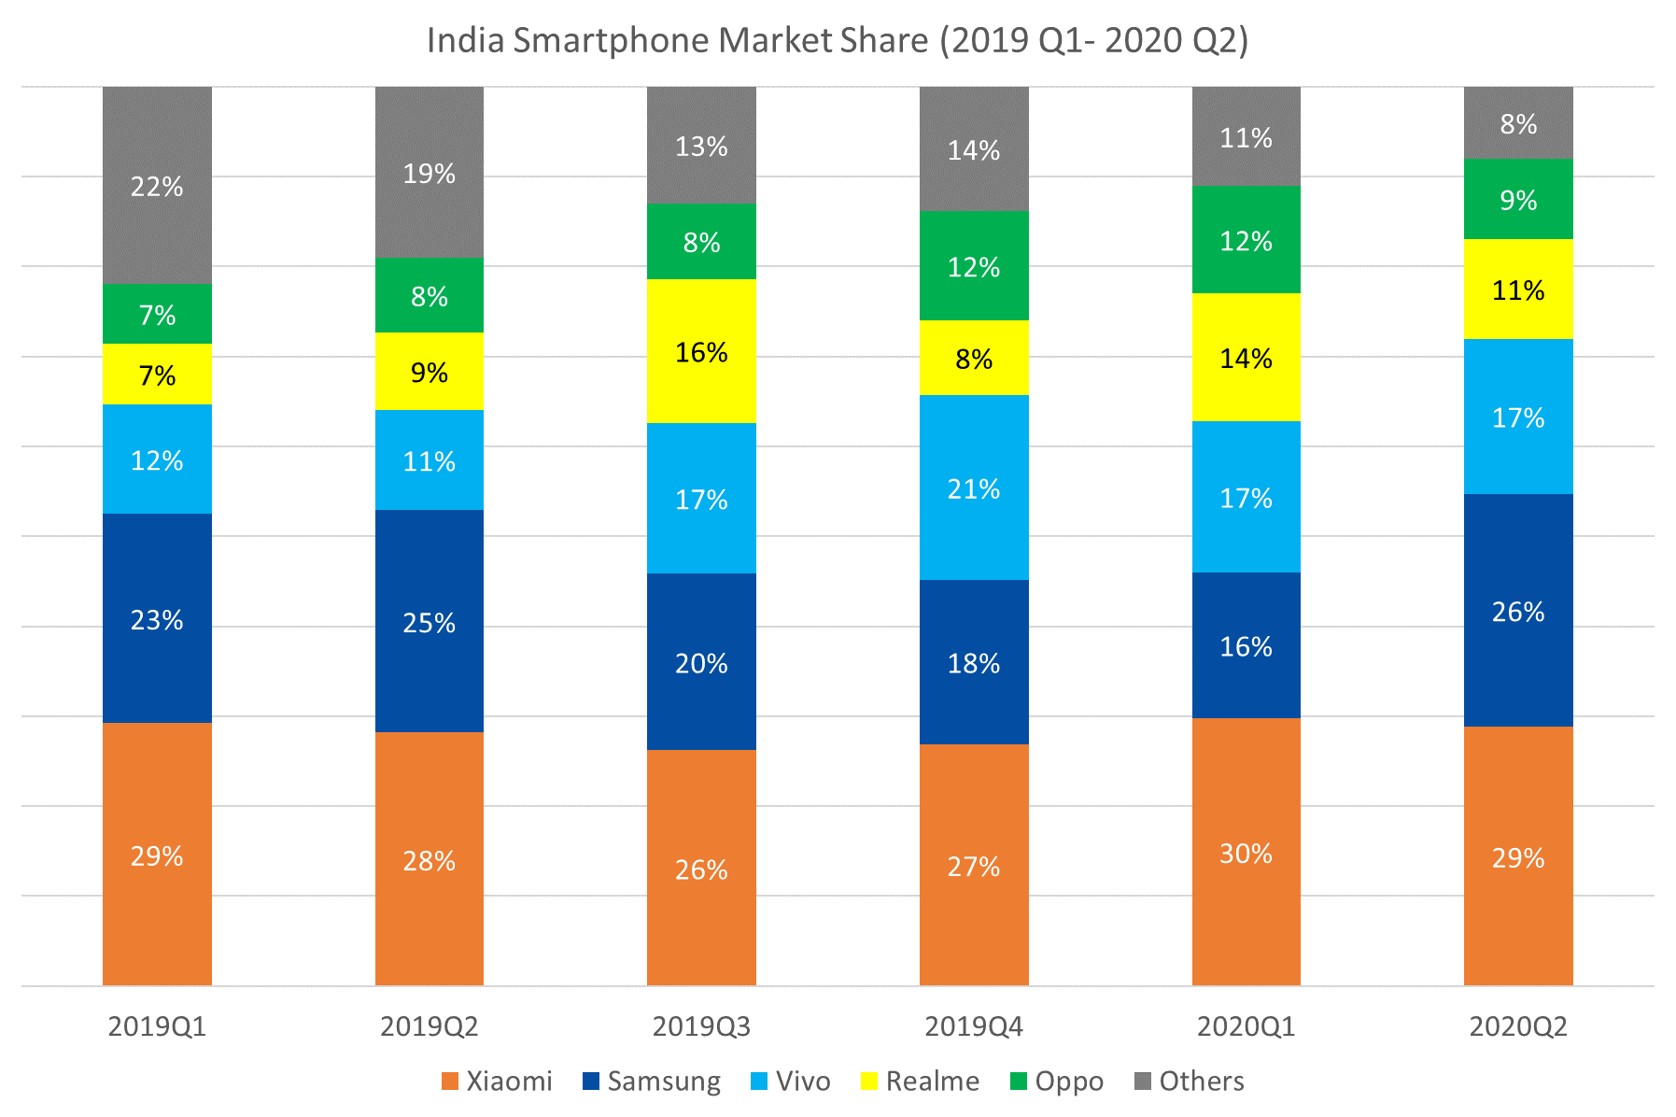 Counterpoint India Smartphone Market Share Q1 2019 - Q2 2020